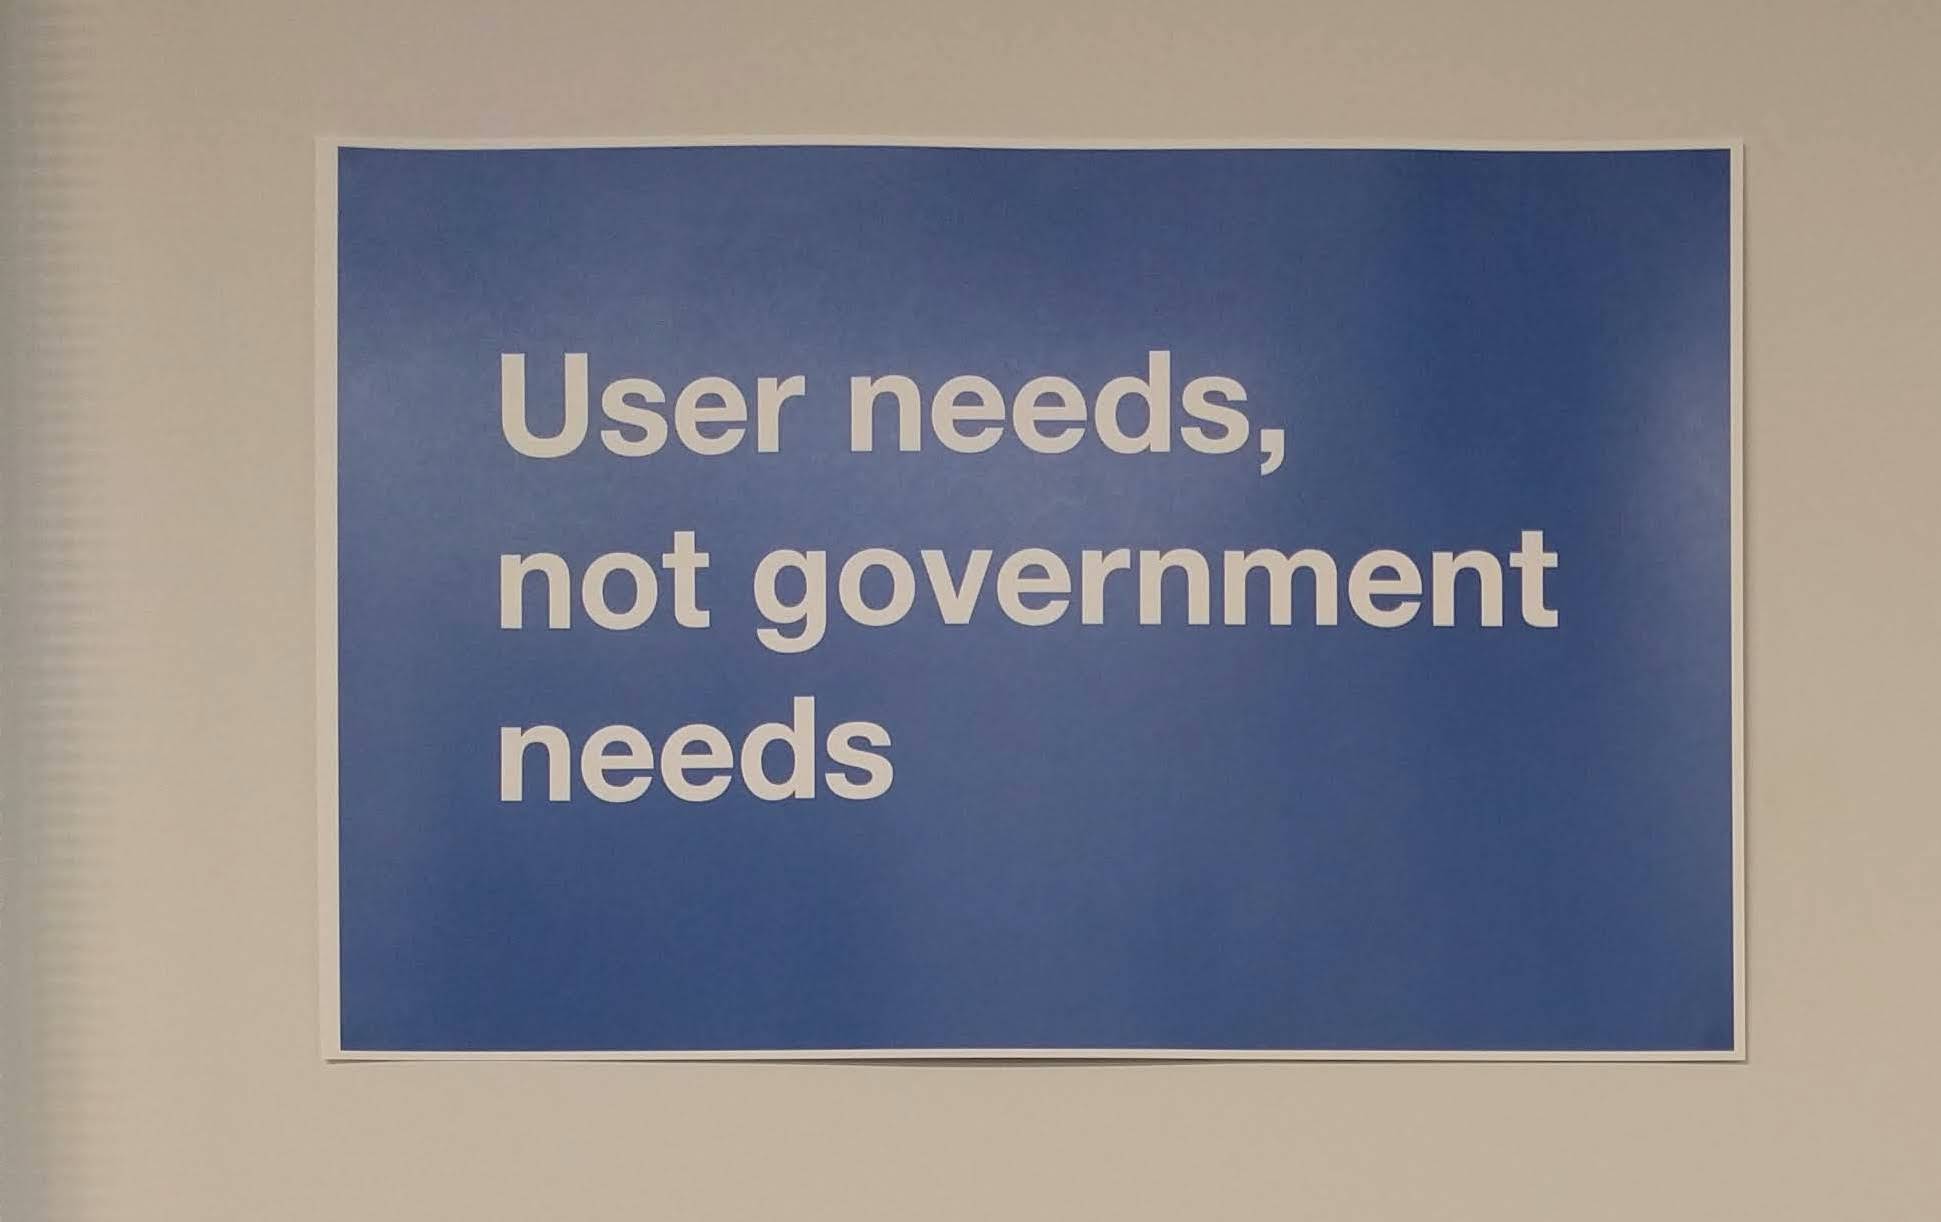 A poster with a blue background that says “User needs, not government needs”.